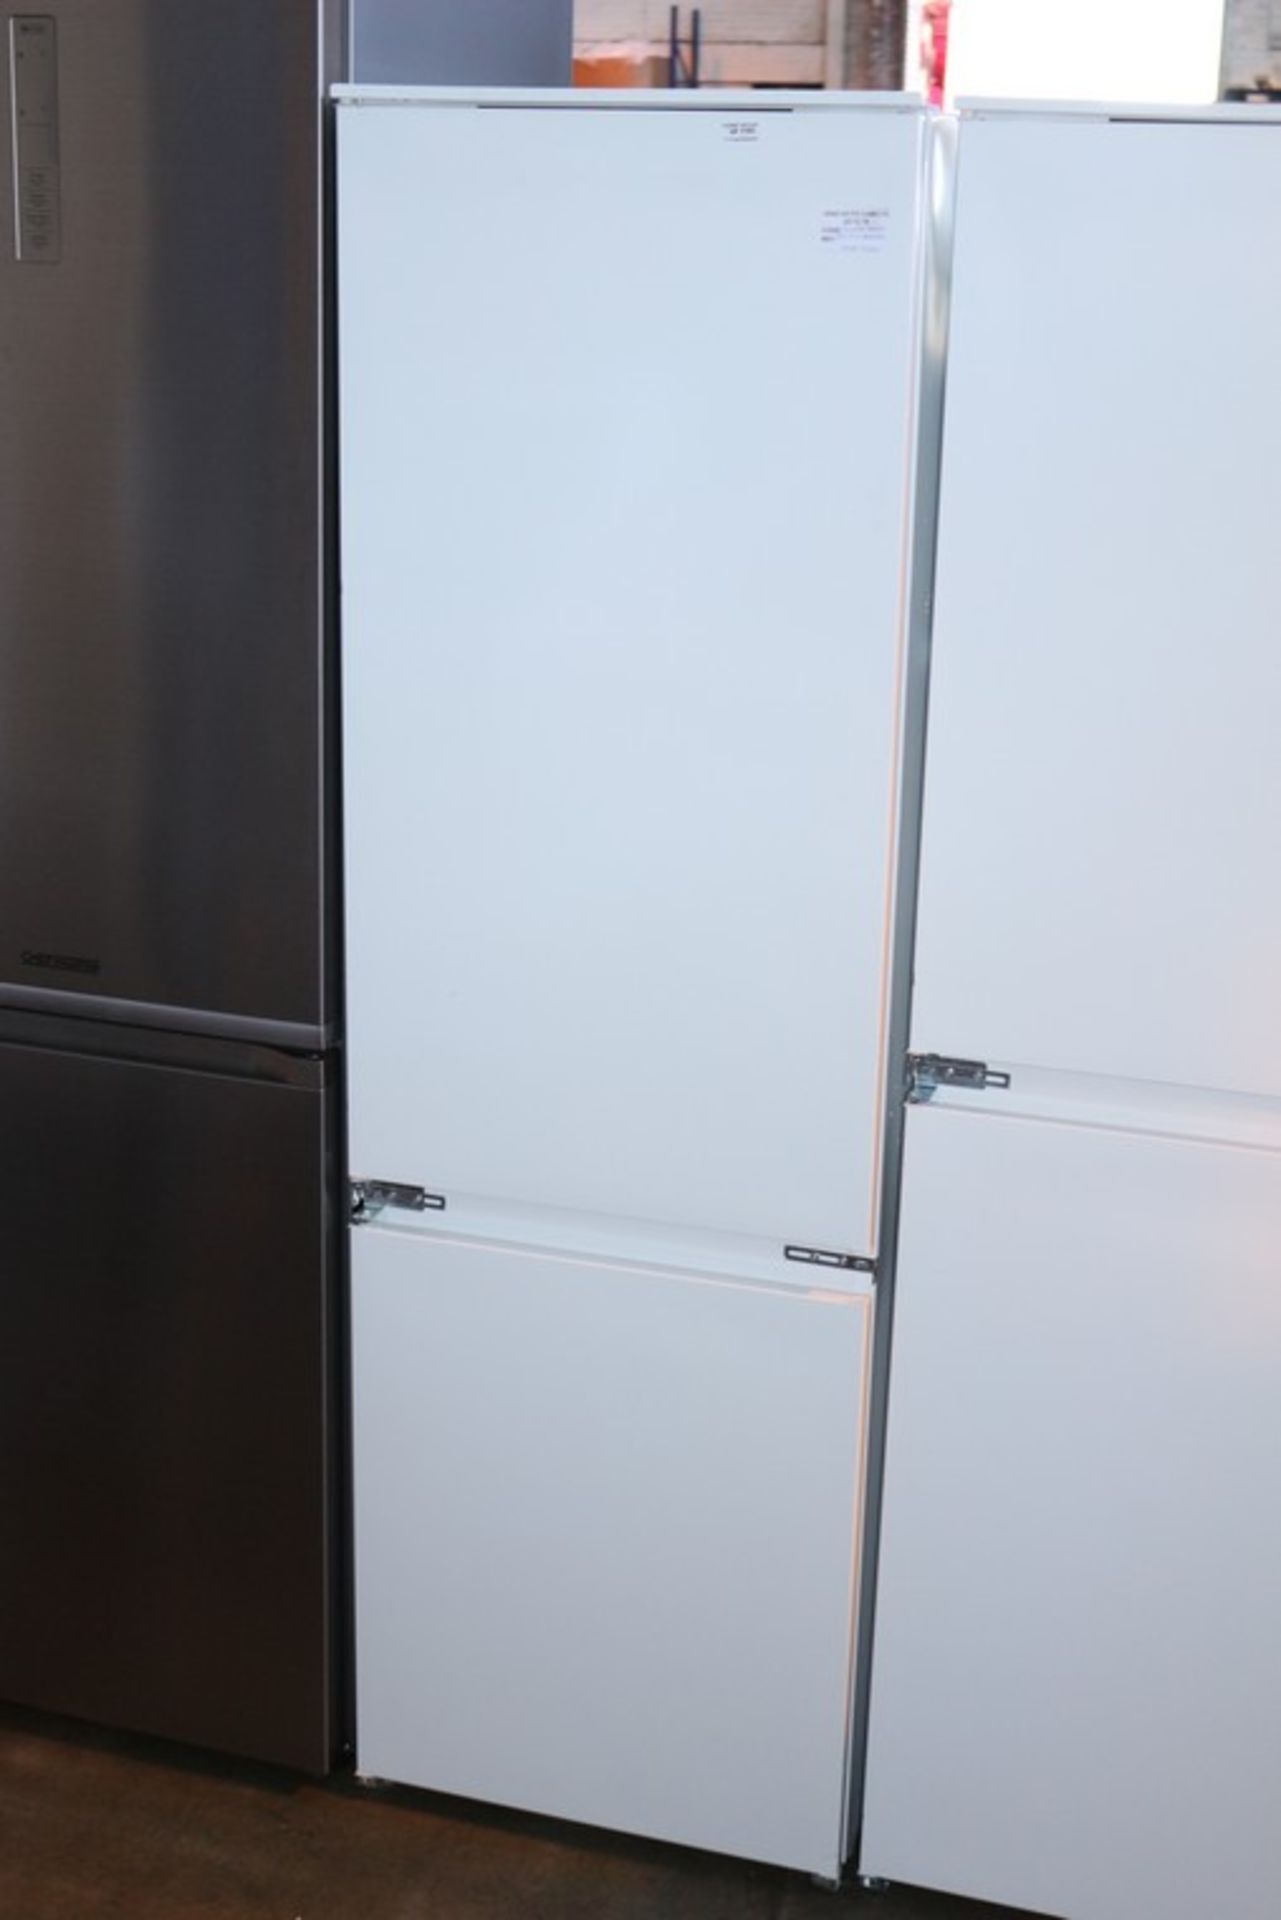 1 x SAMSUNG CHEF COLLECTION STAINLESS STEEL FREE STANDING FRIDGE FREEZER (2400853) RRP £100 (22.12.